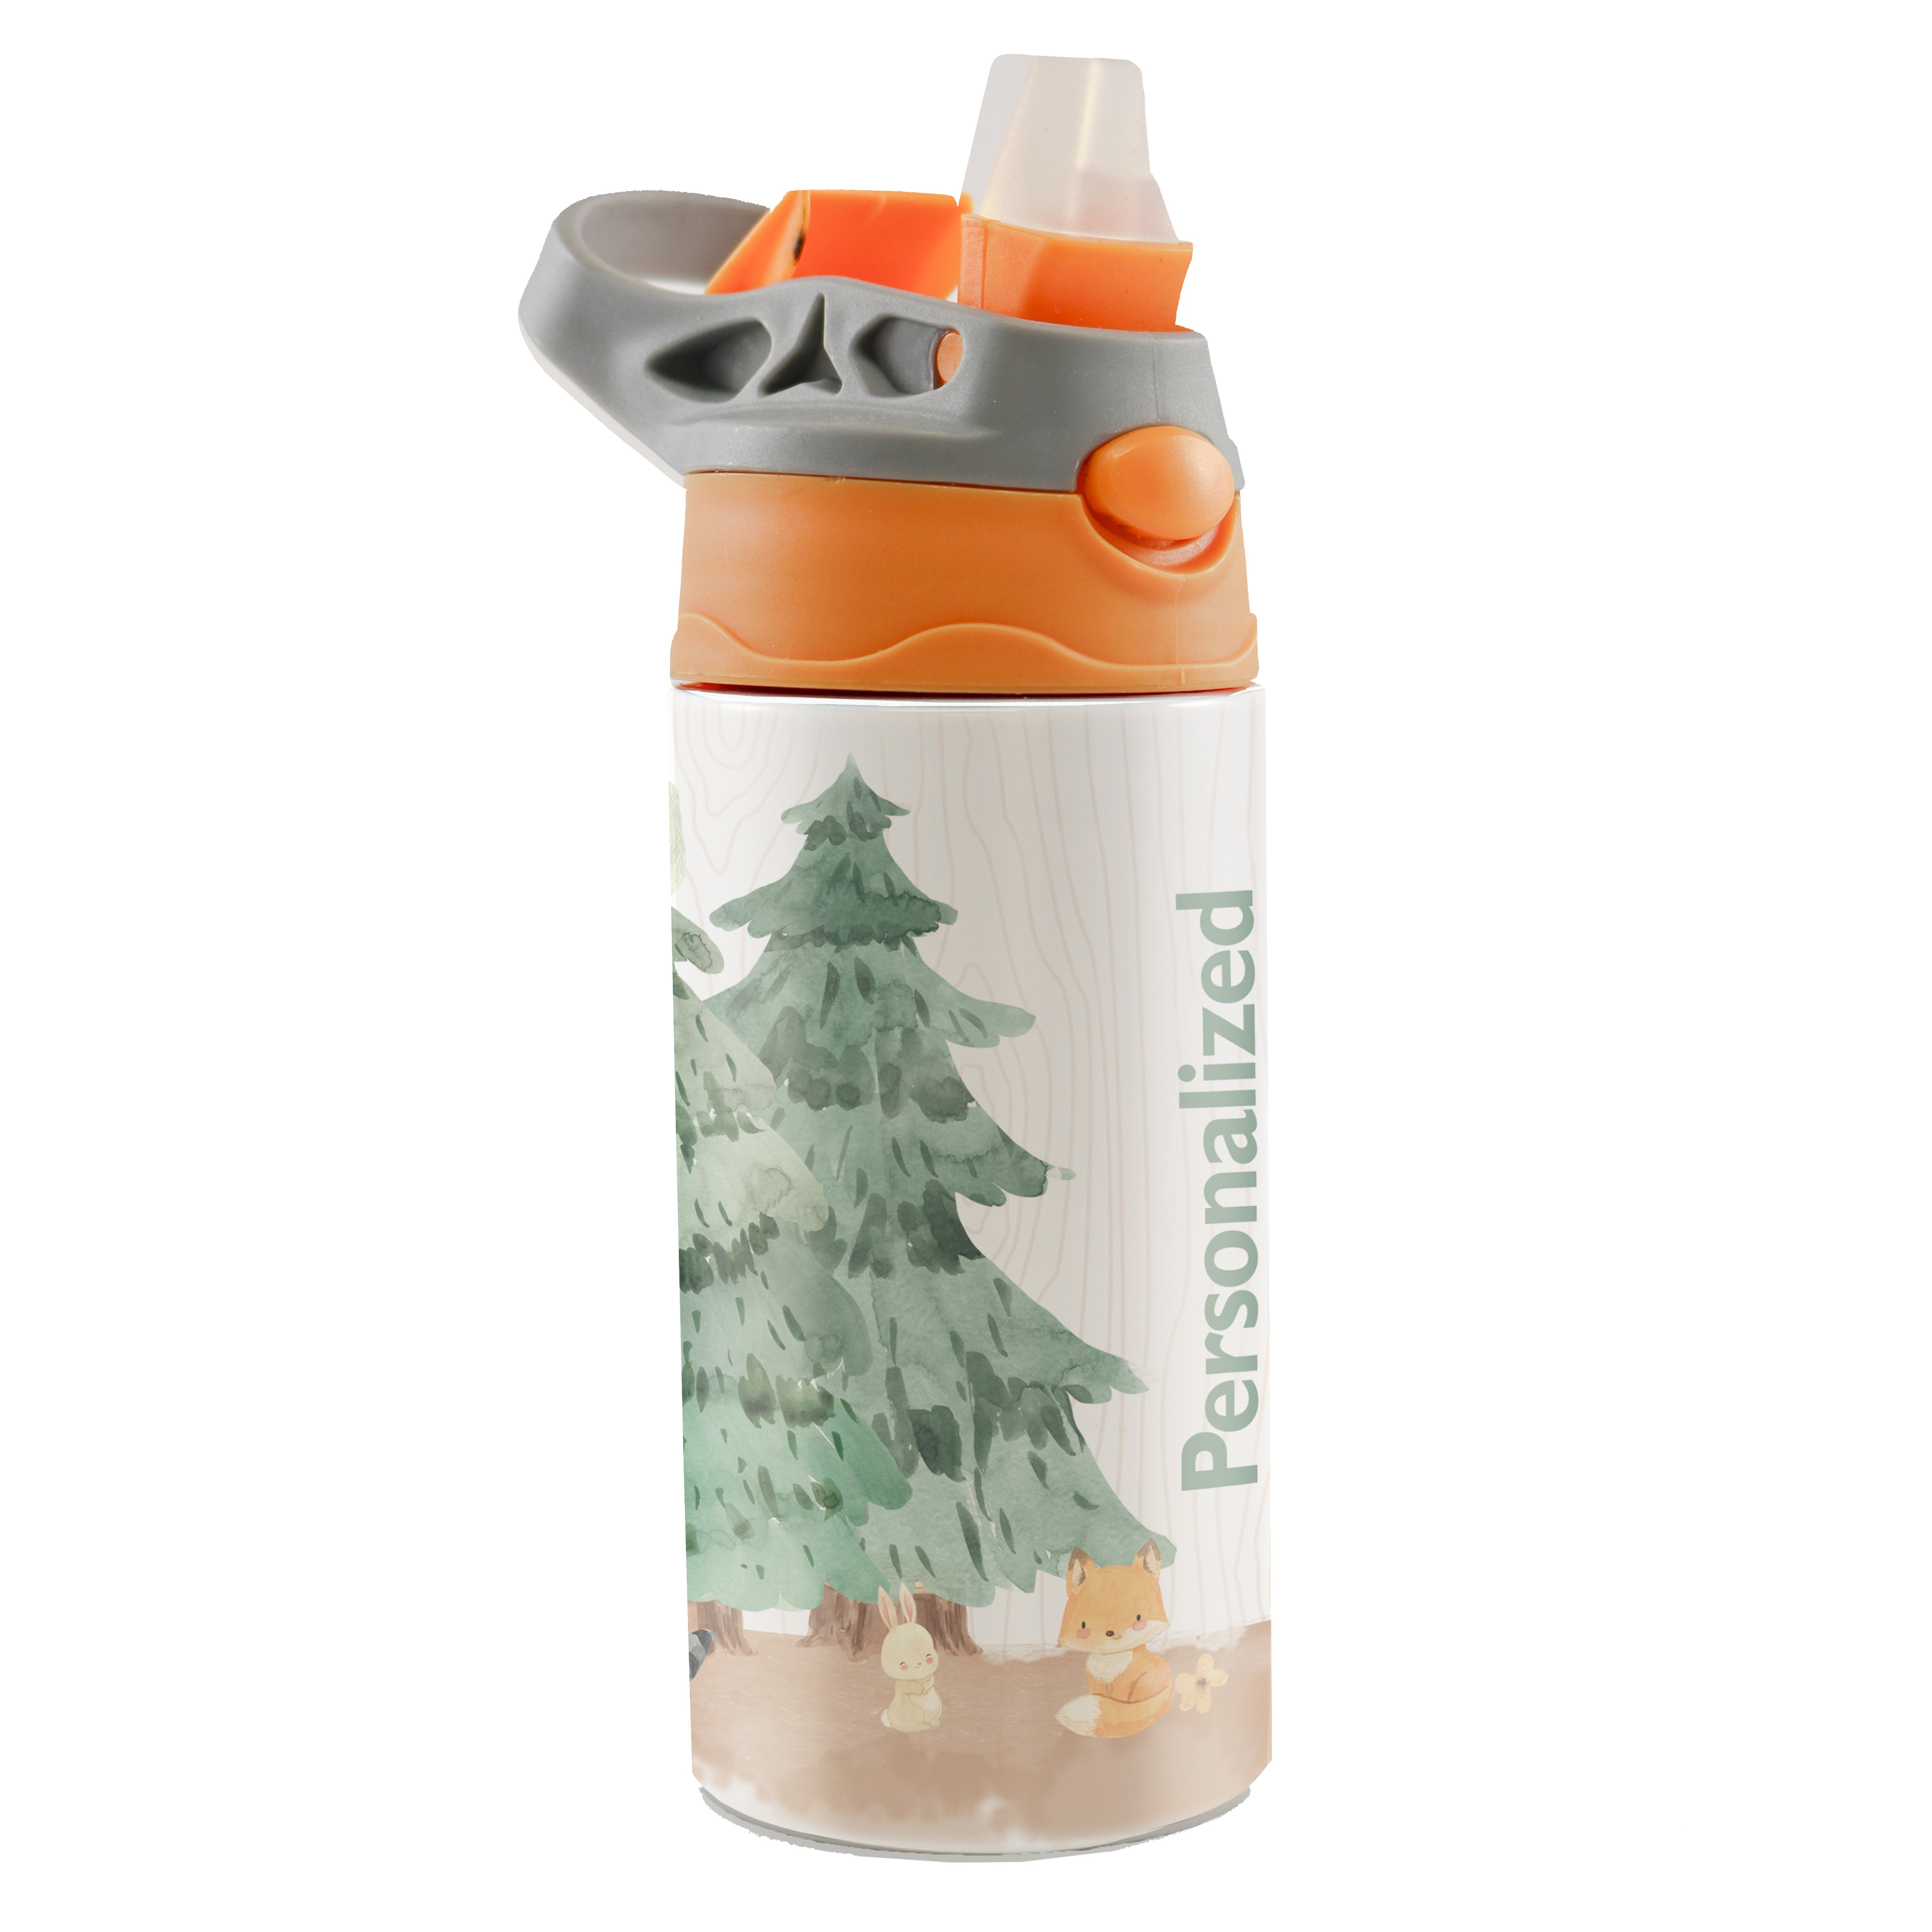 Trend Setters Original (Woodland Baby Animals - Personalize with Name) 12 oz Stainless Steel Water Bottle with Orange and Grey Lid